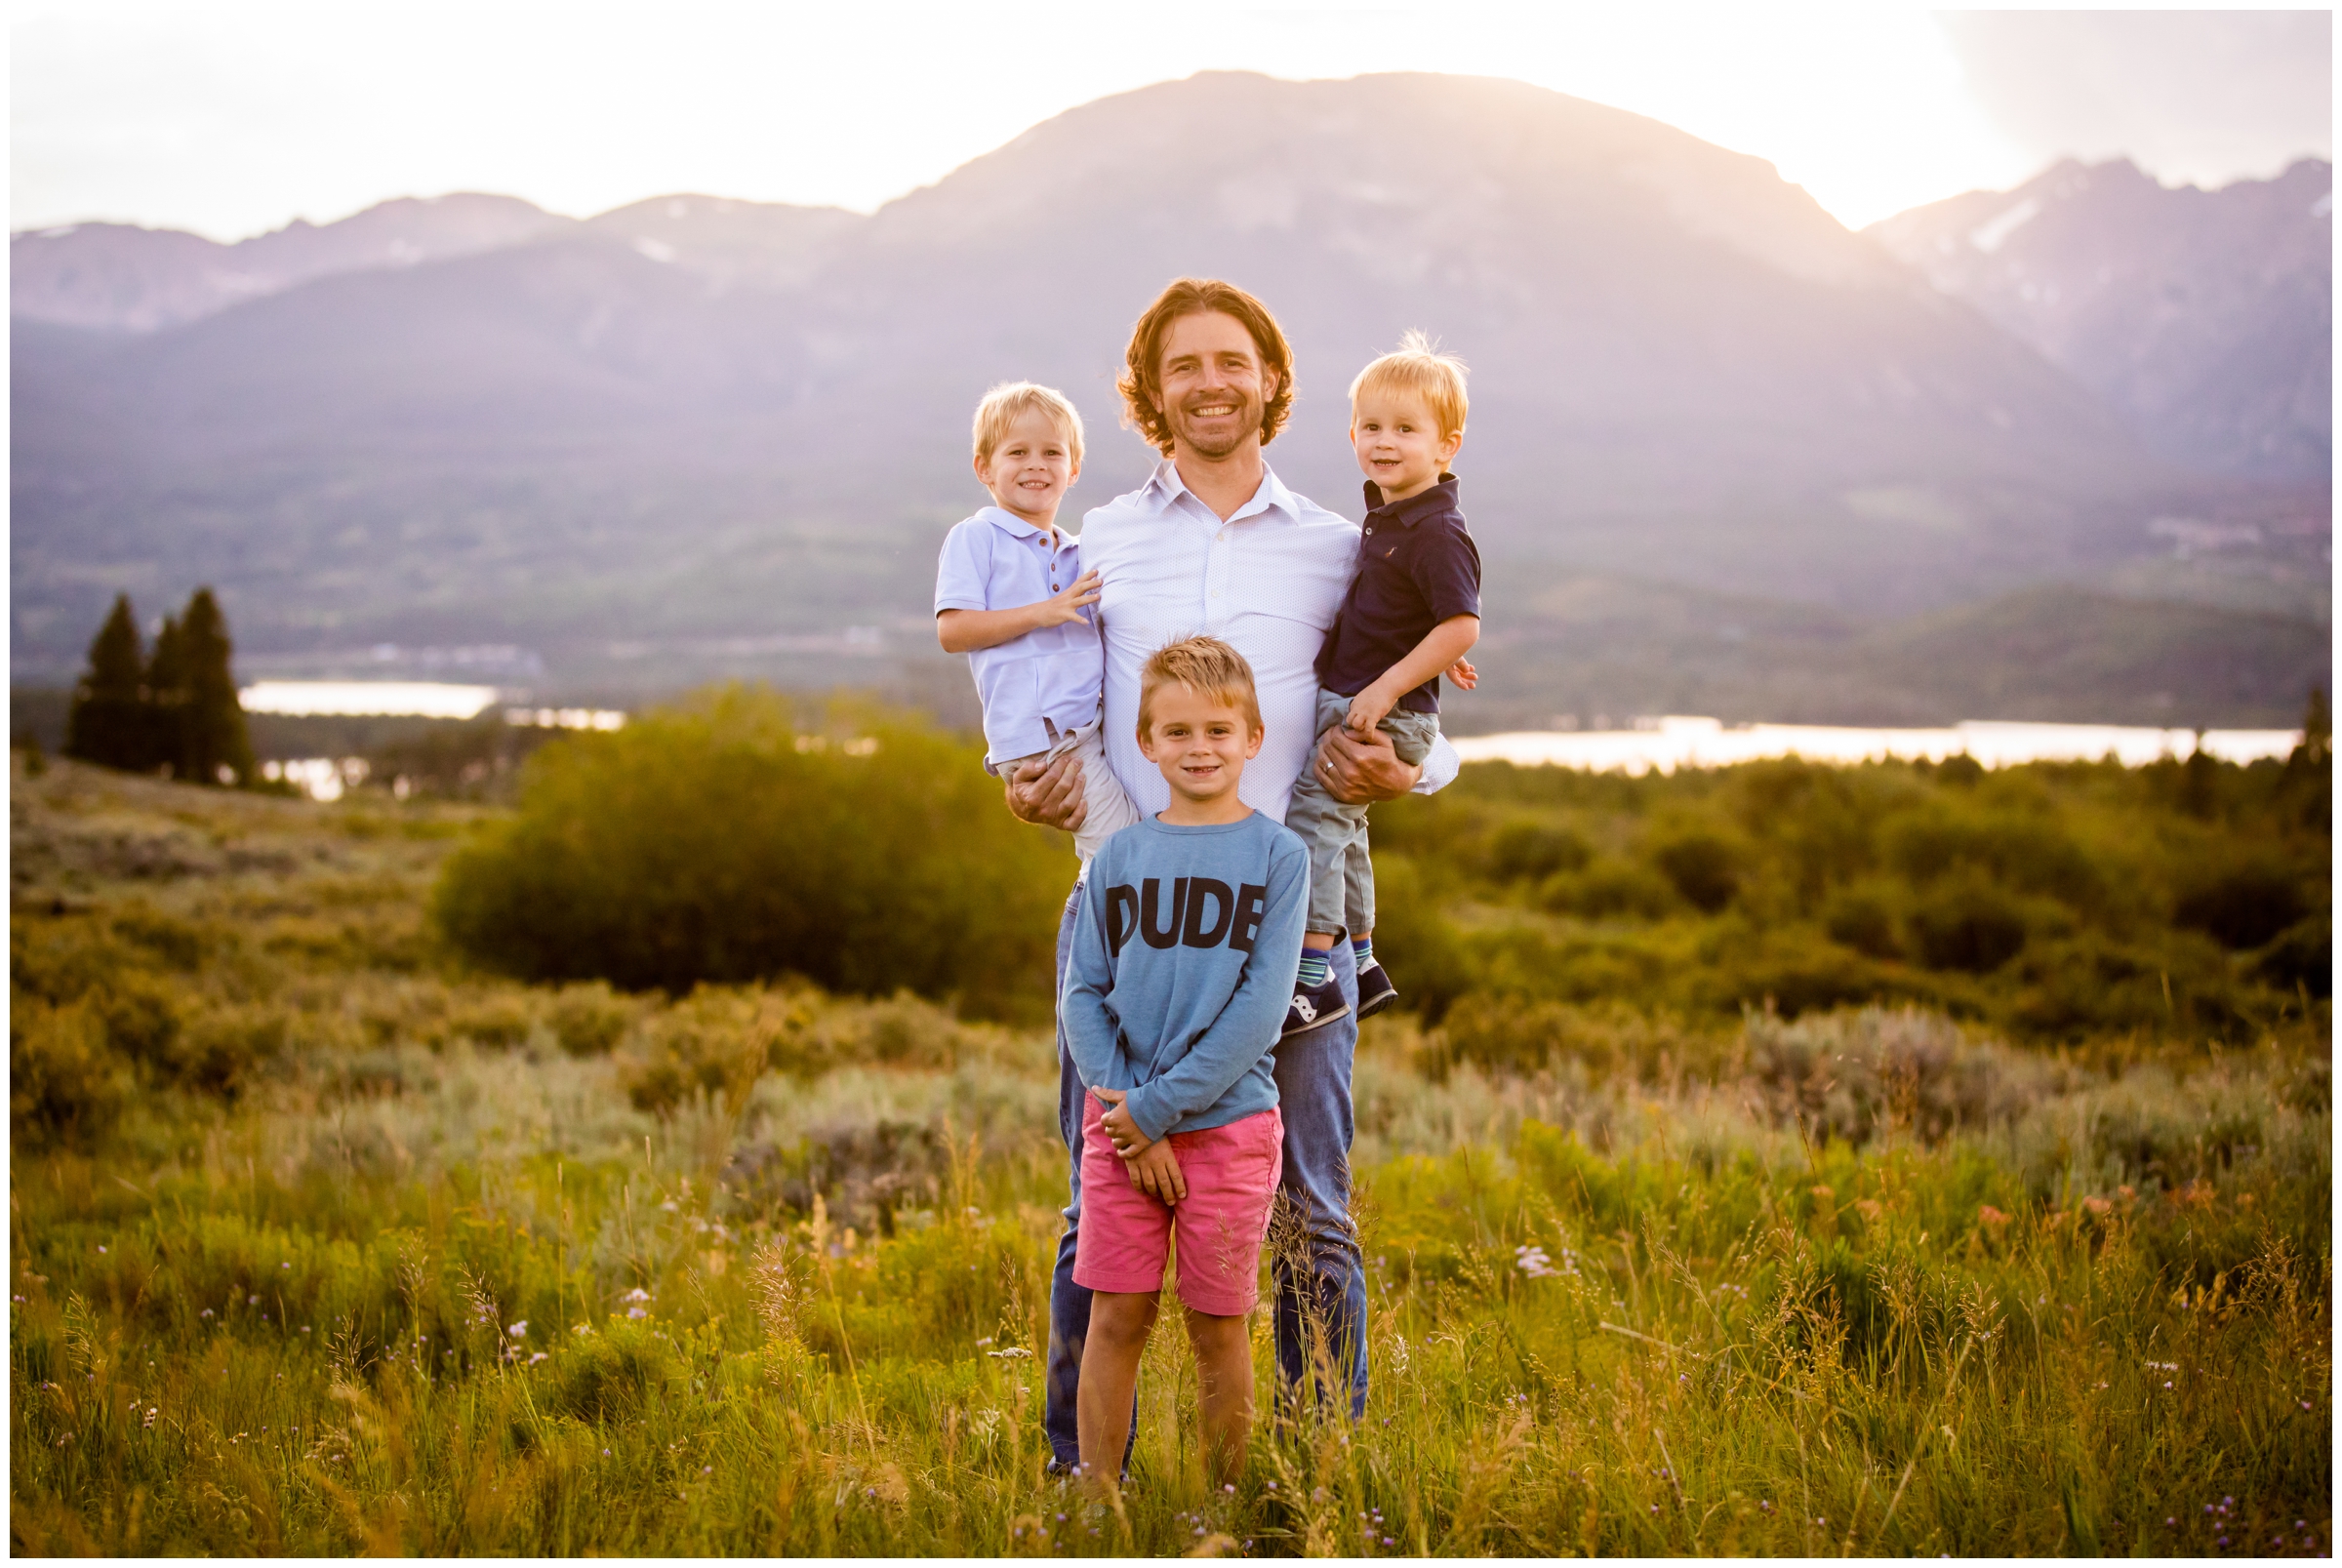 Windy point campground family portraits in Colorado mountains 